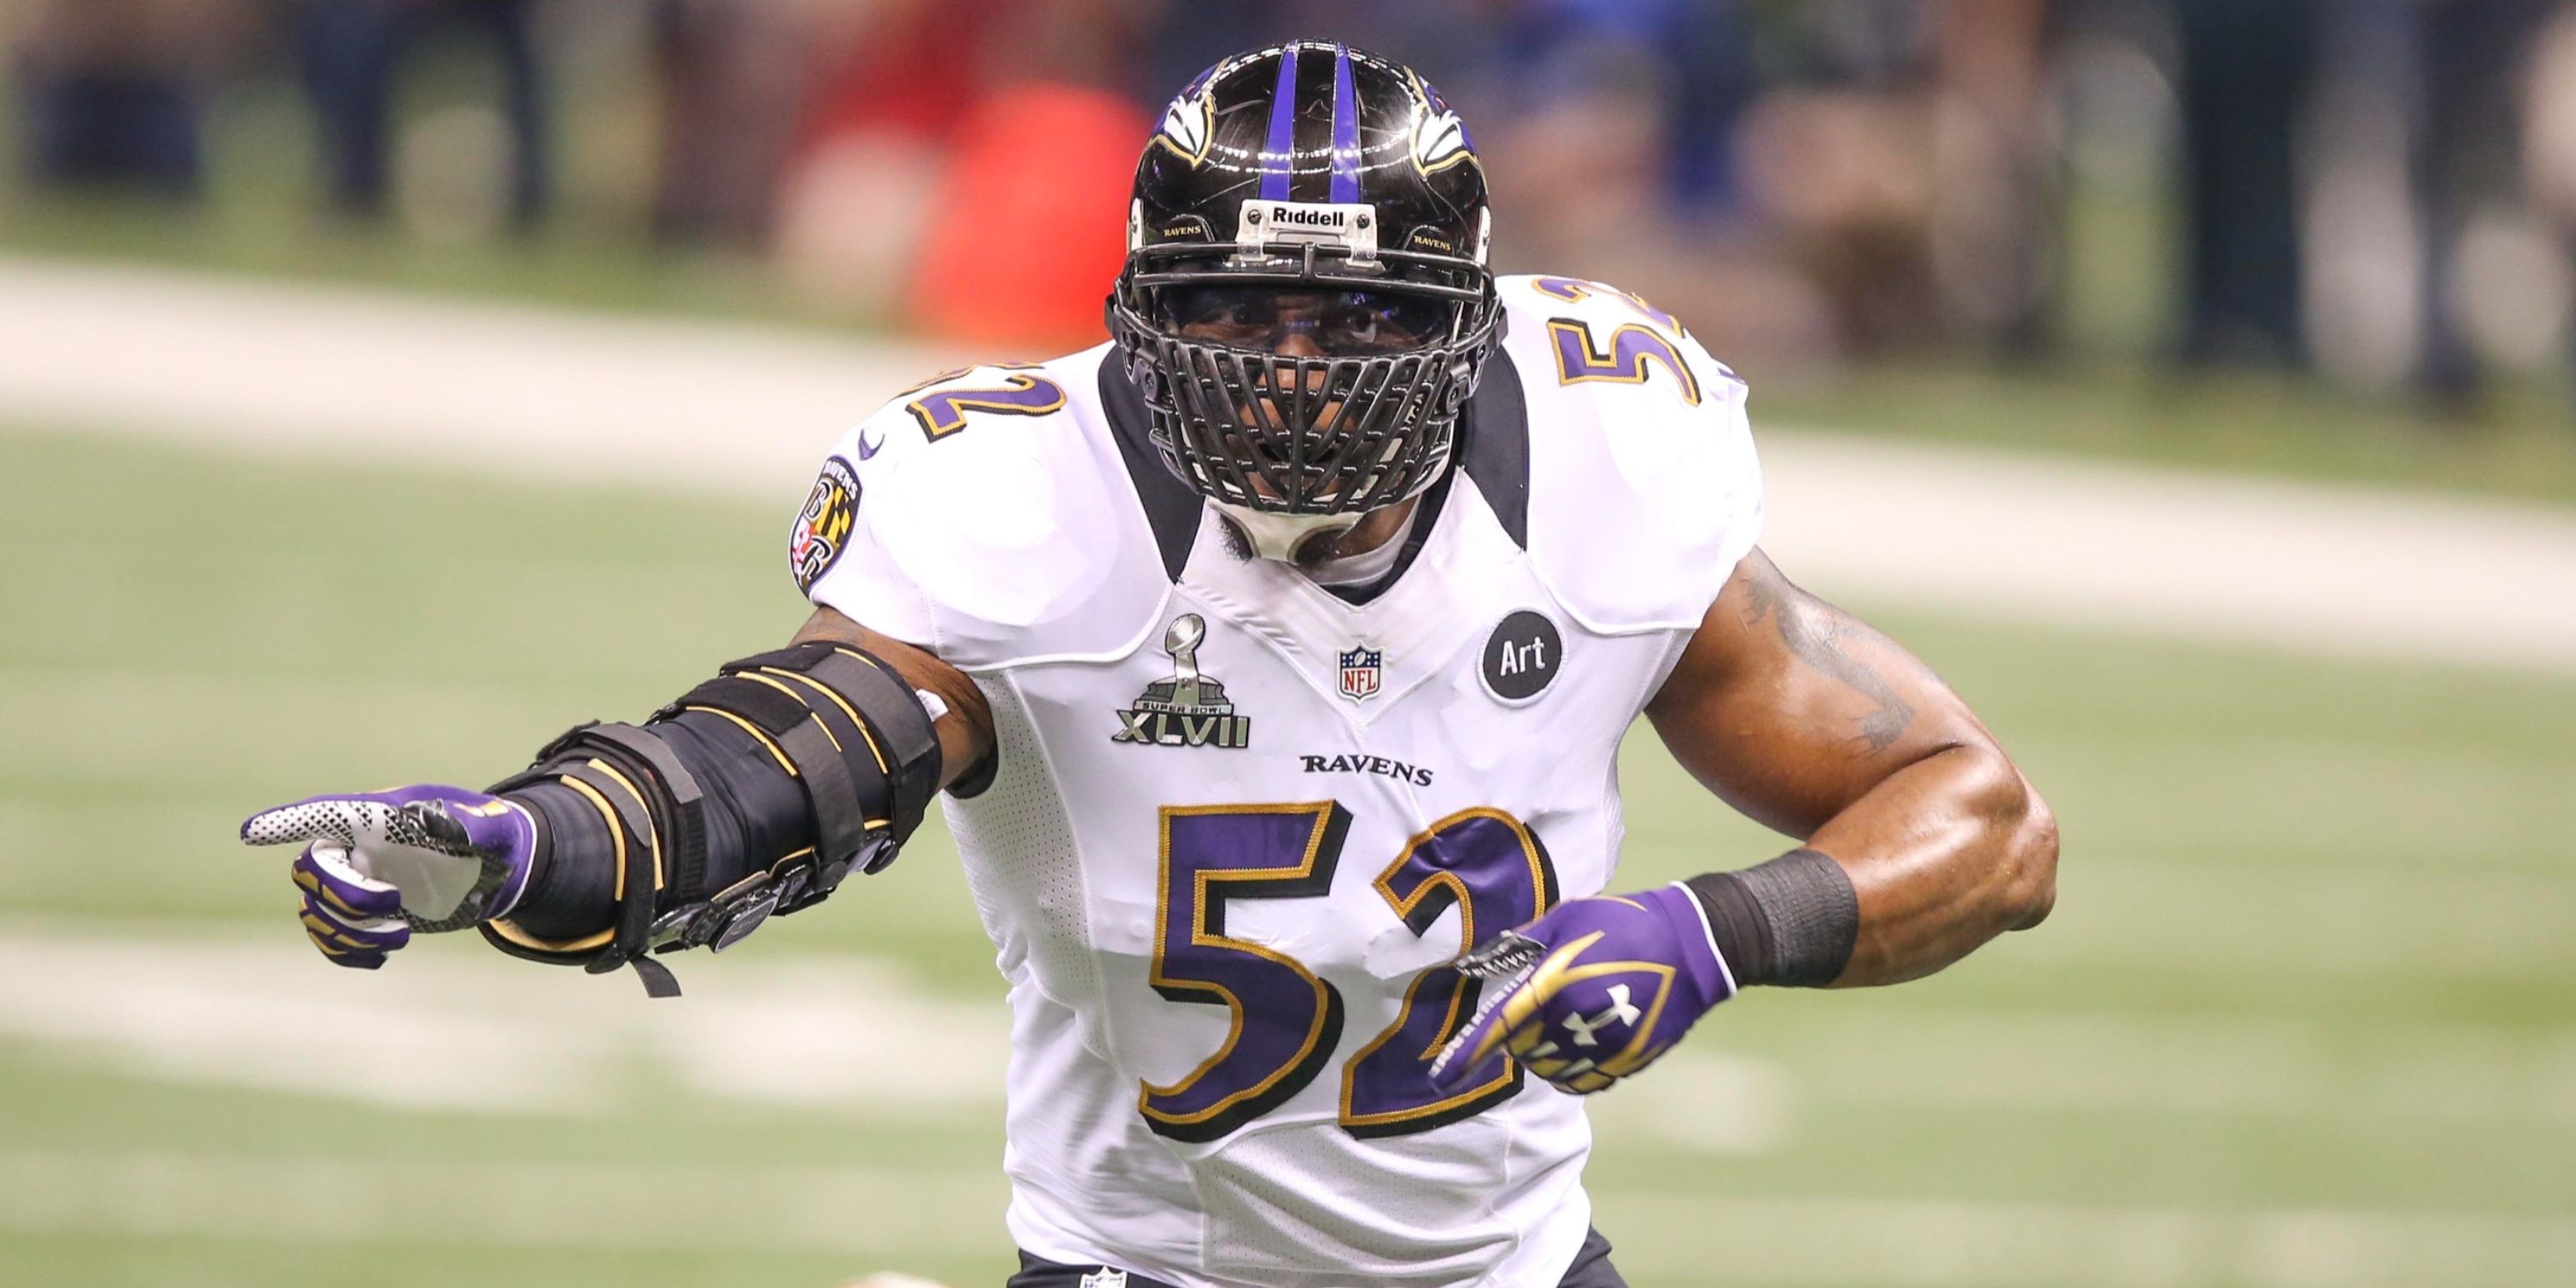 Ray Lewis directs traffic in Super Bowl XLVII